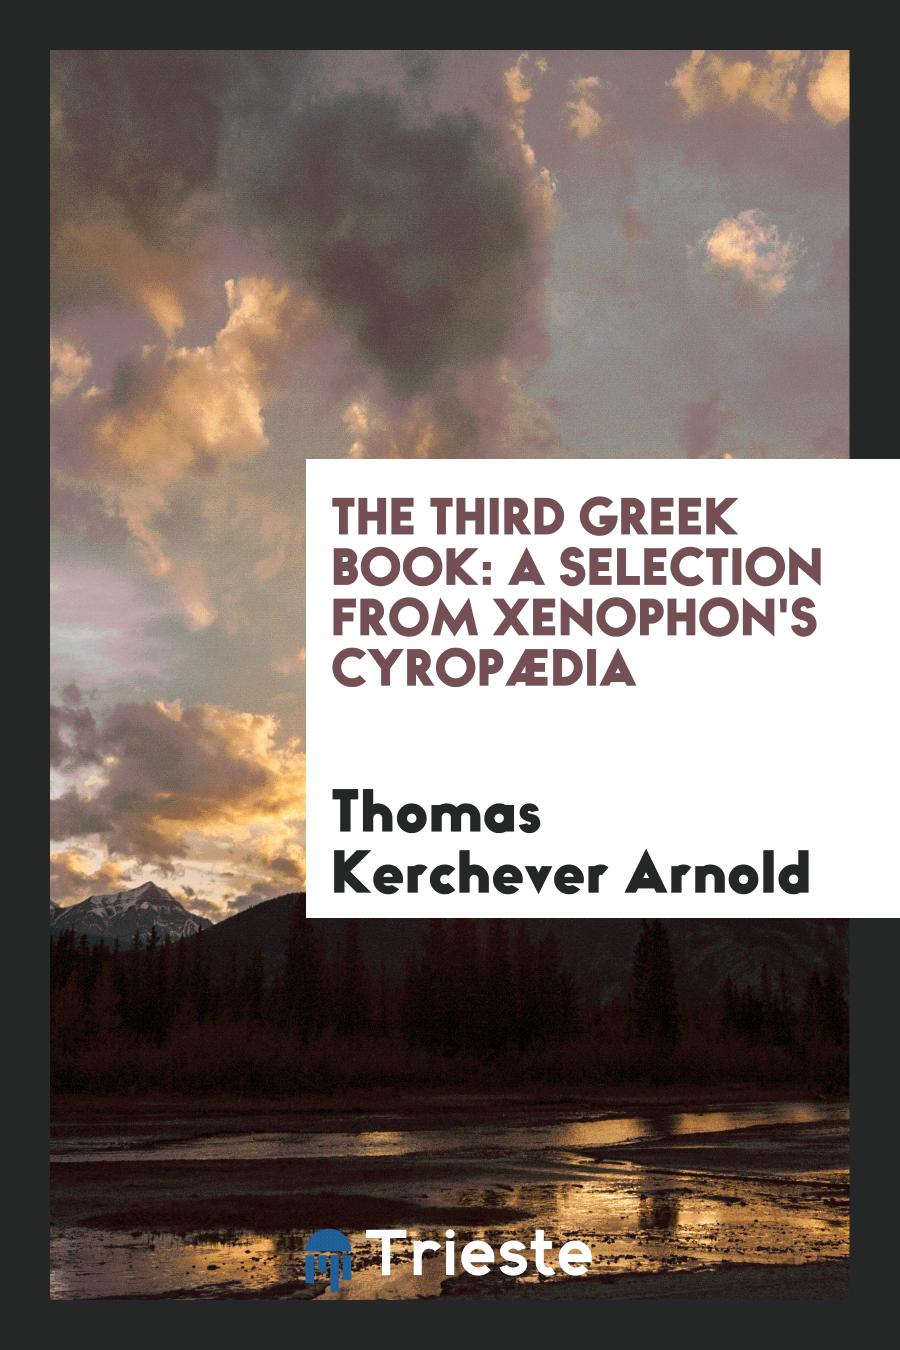 The Third Greek Book: A Selection from Xenophon's Cyropædia